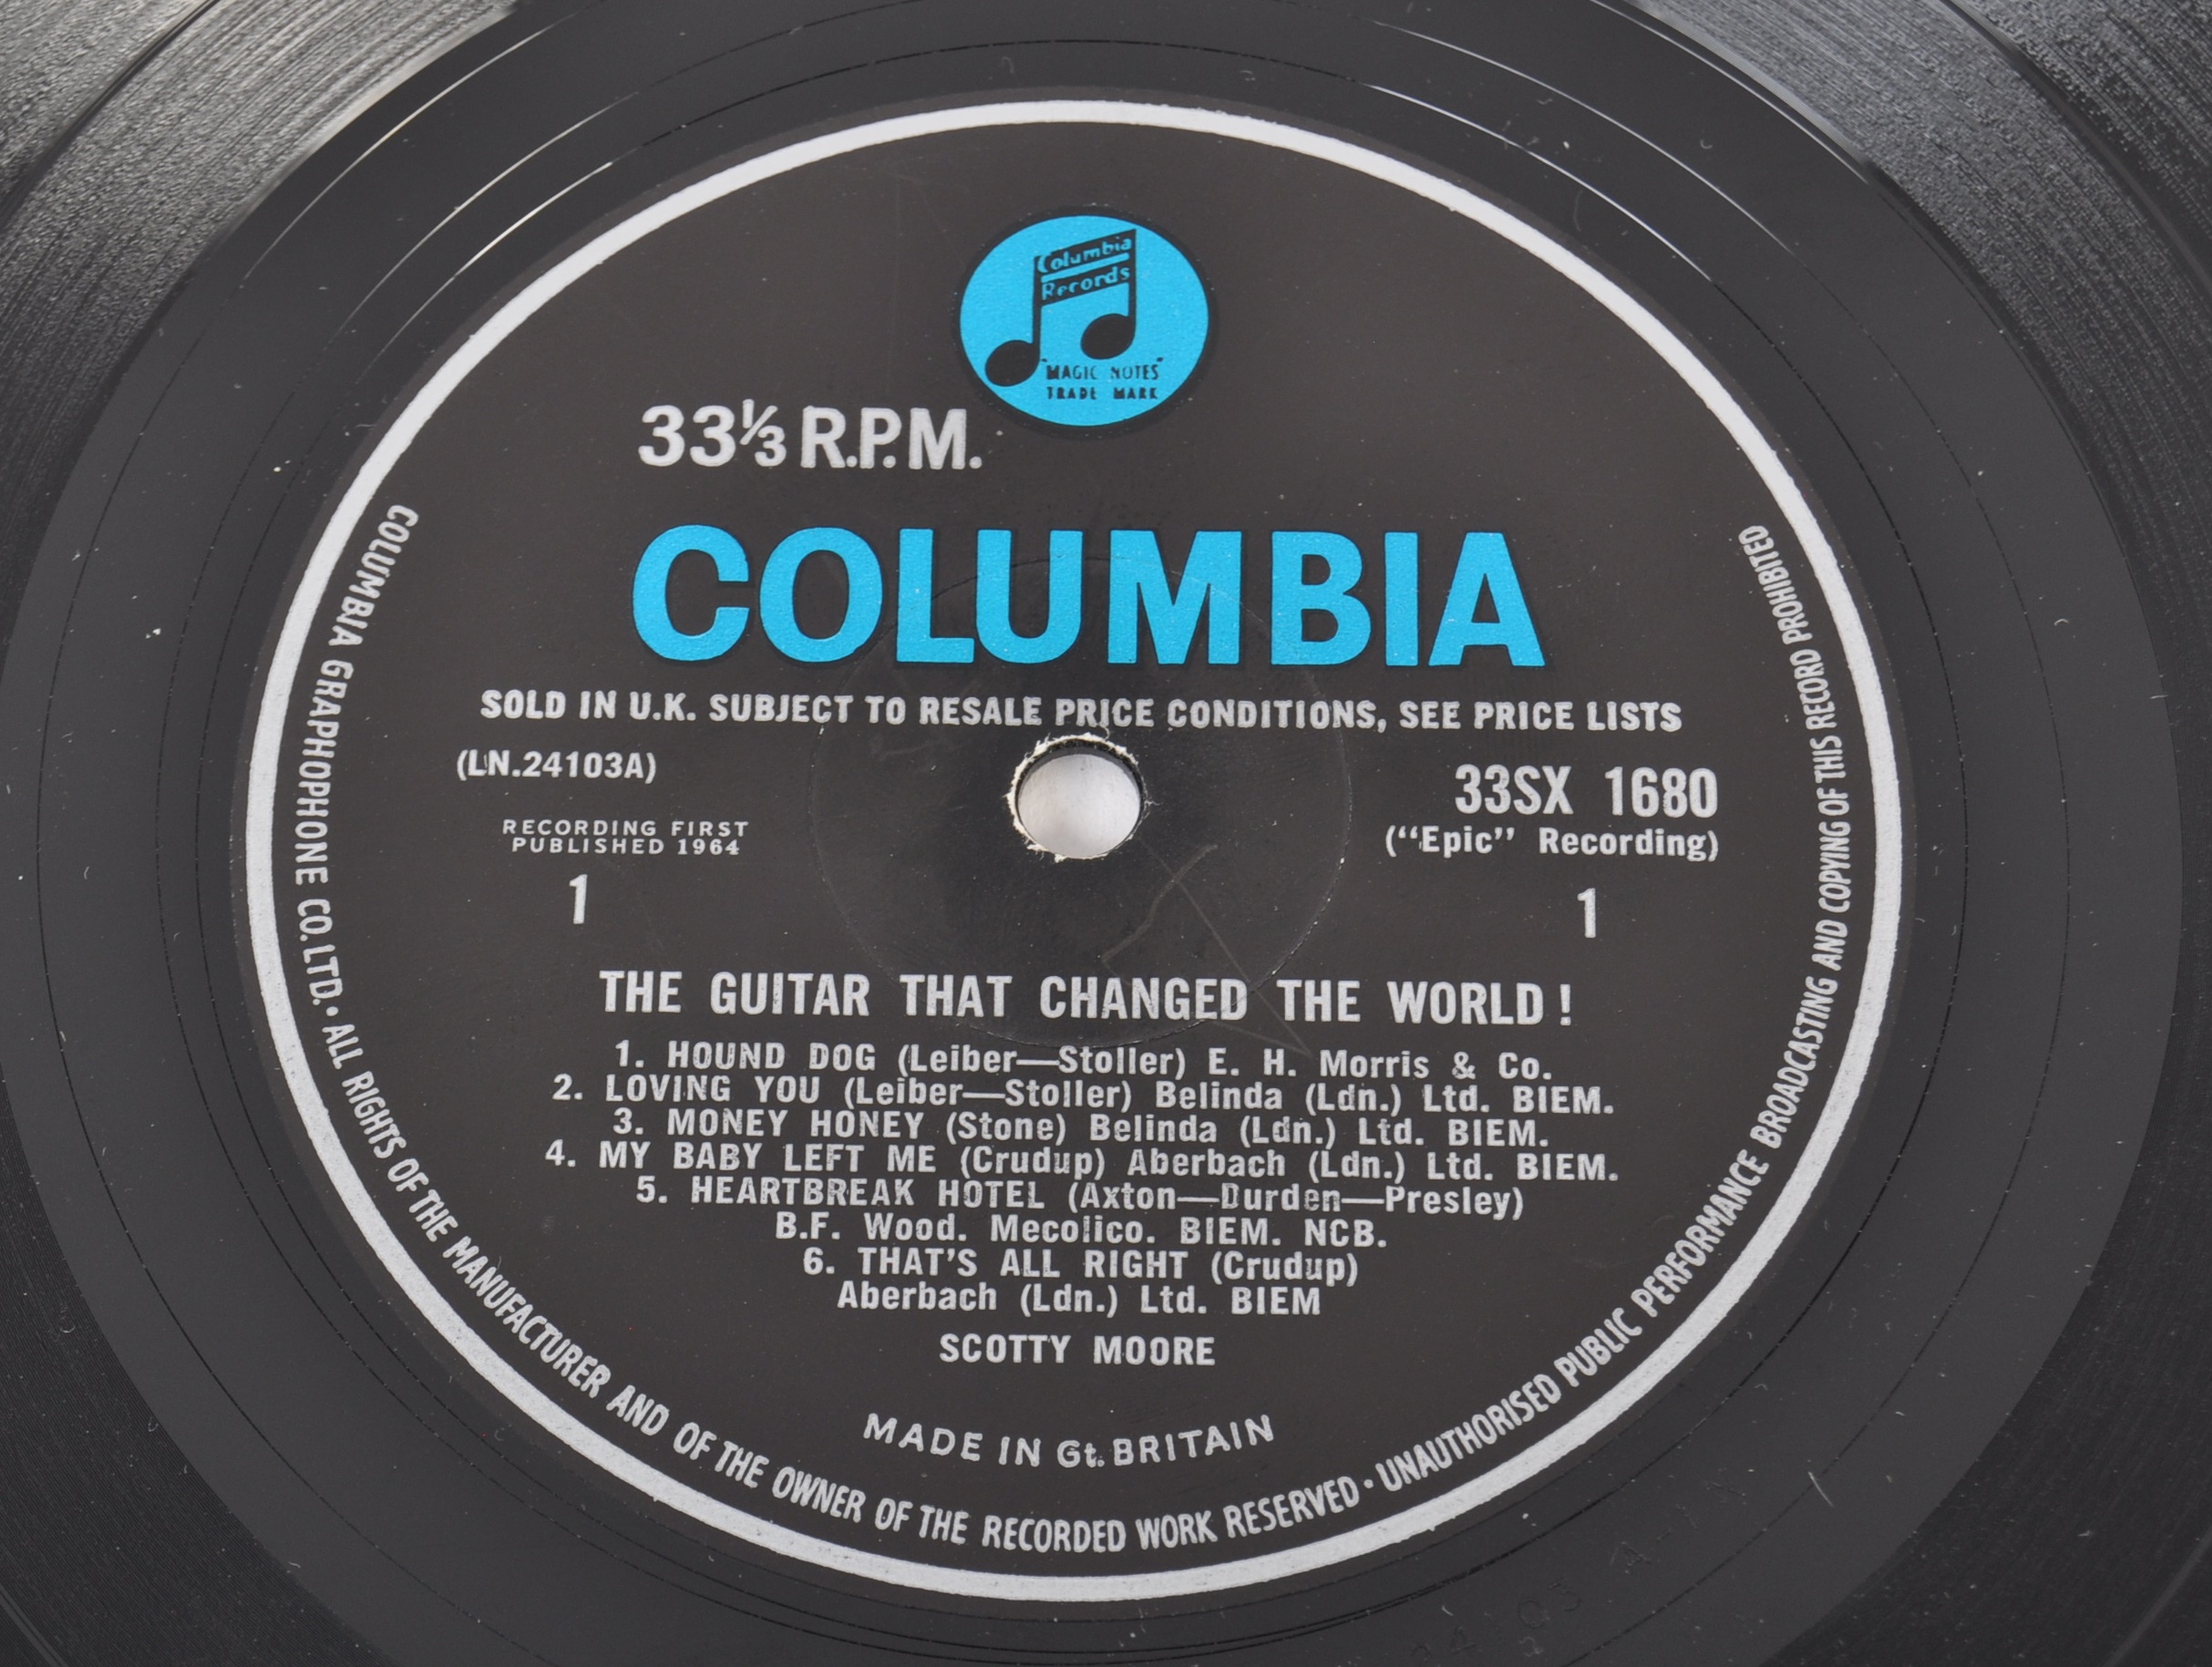 SCOTTY MOORE - THE GUITAR THAT CHANGED THE WORLD! - 1964 COLUMBIA RELEASE - Image 3 of 4